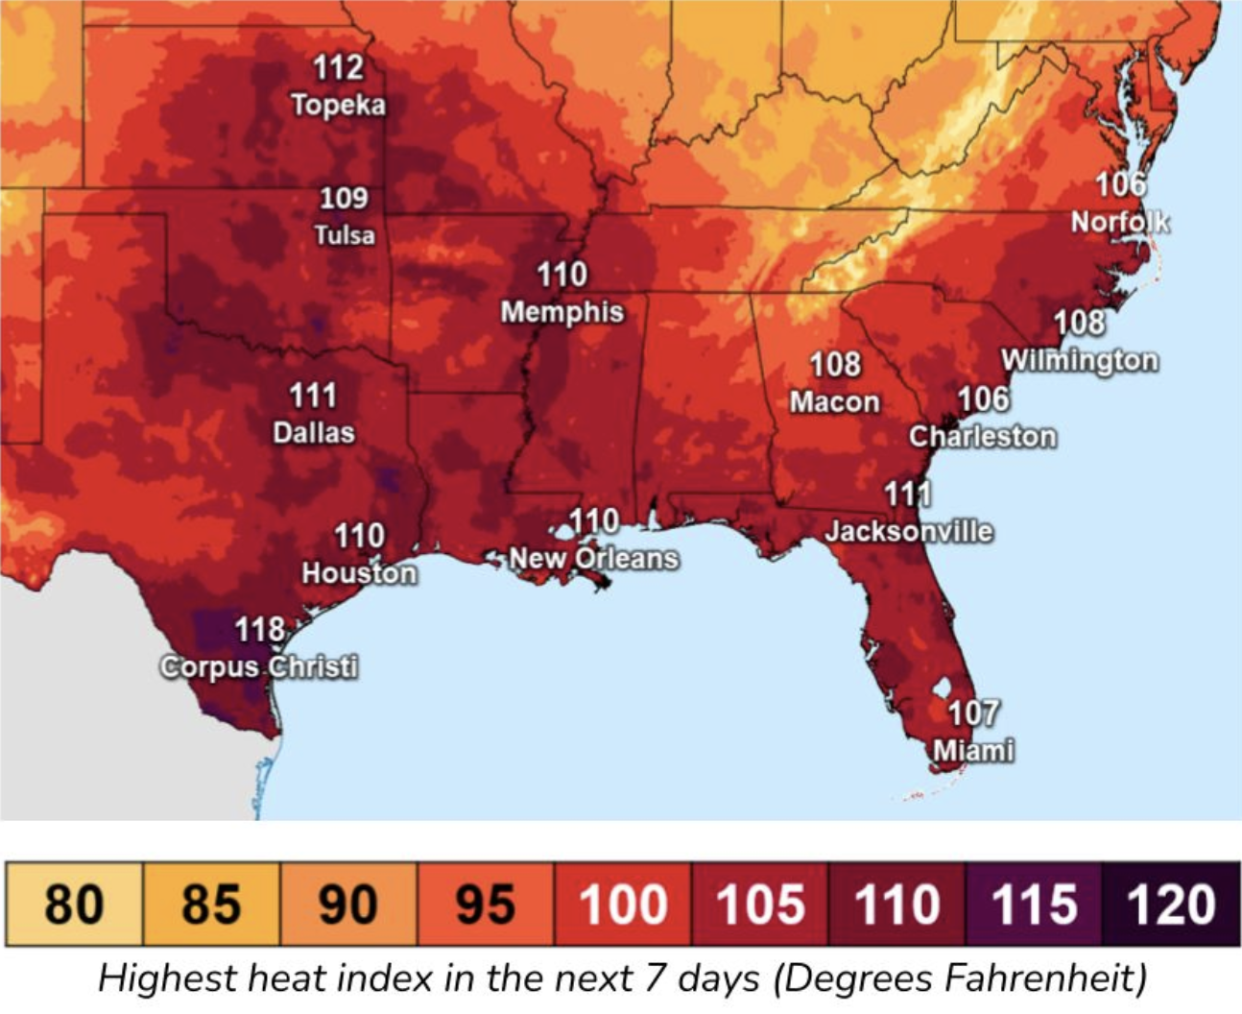 Relentless heat is continuing across large parts of the United States this summer. The climate crisis is making extremes much more likely (NOAA)